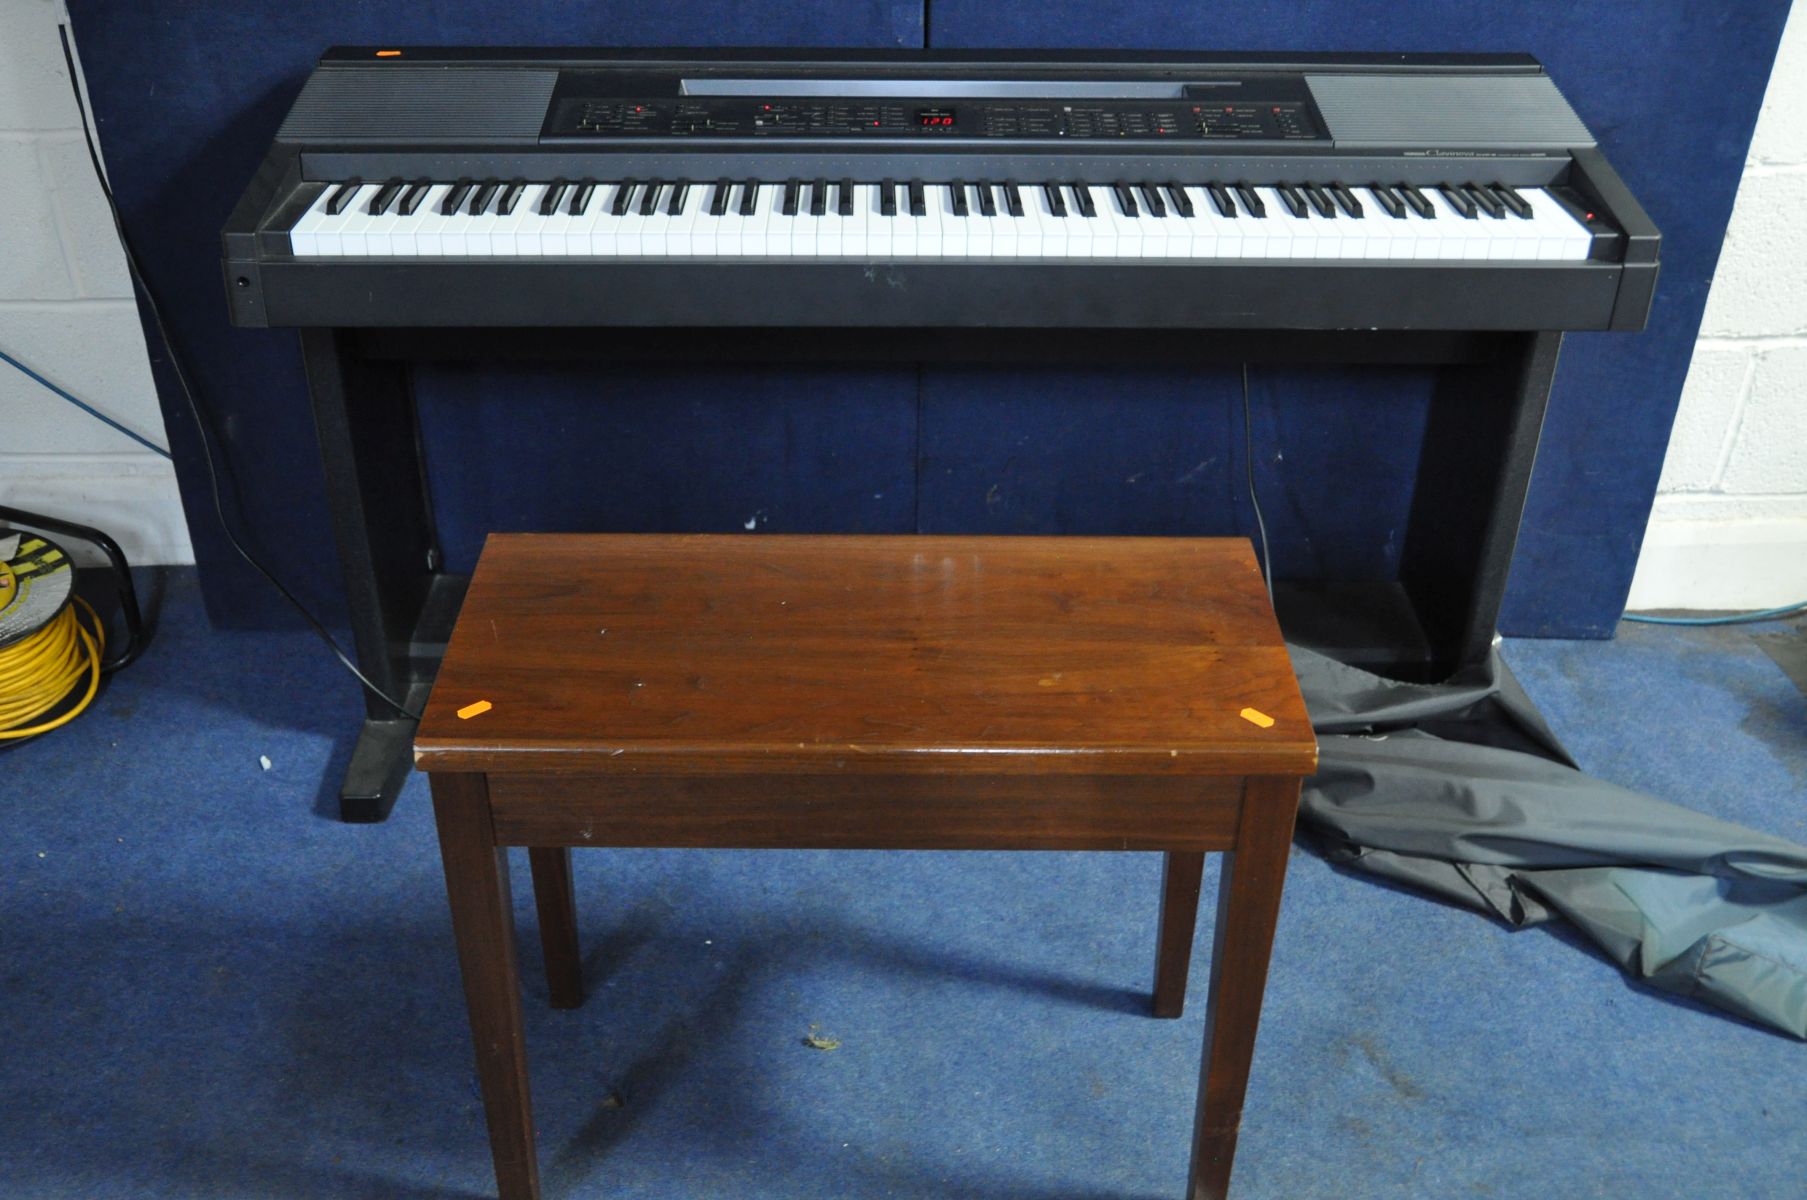 A YAMAHA CLAVINOVA CVP-8 DIGITAL PIANO on stand with cover (PAT pass, all keys appear to be working)